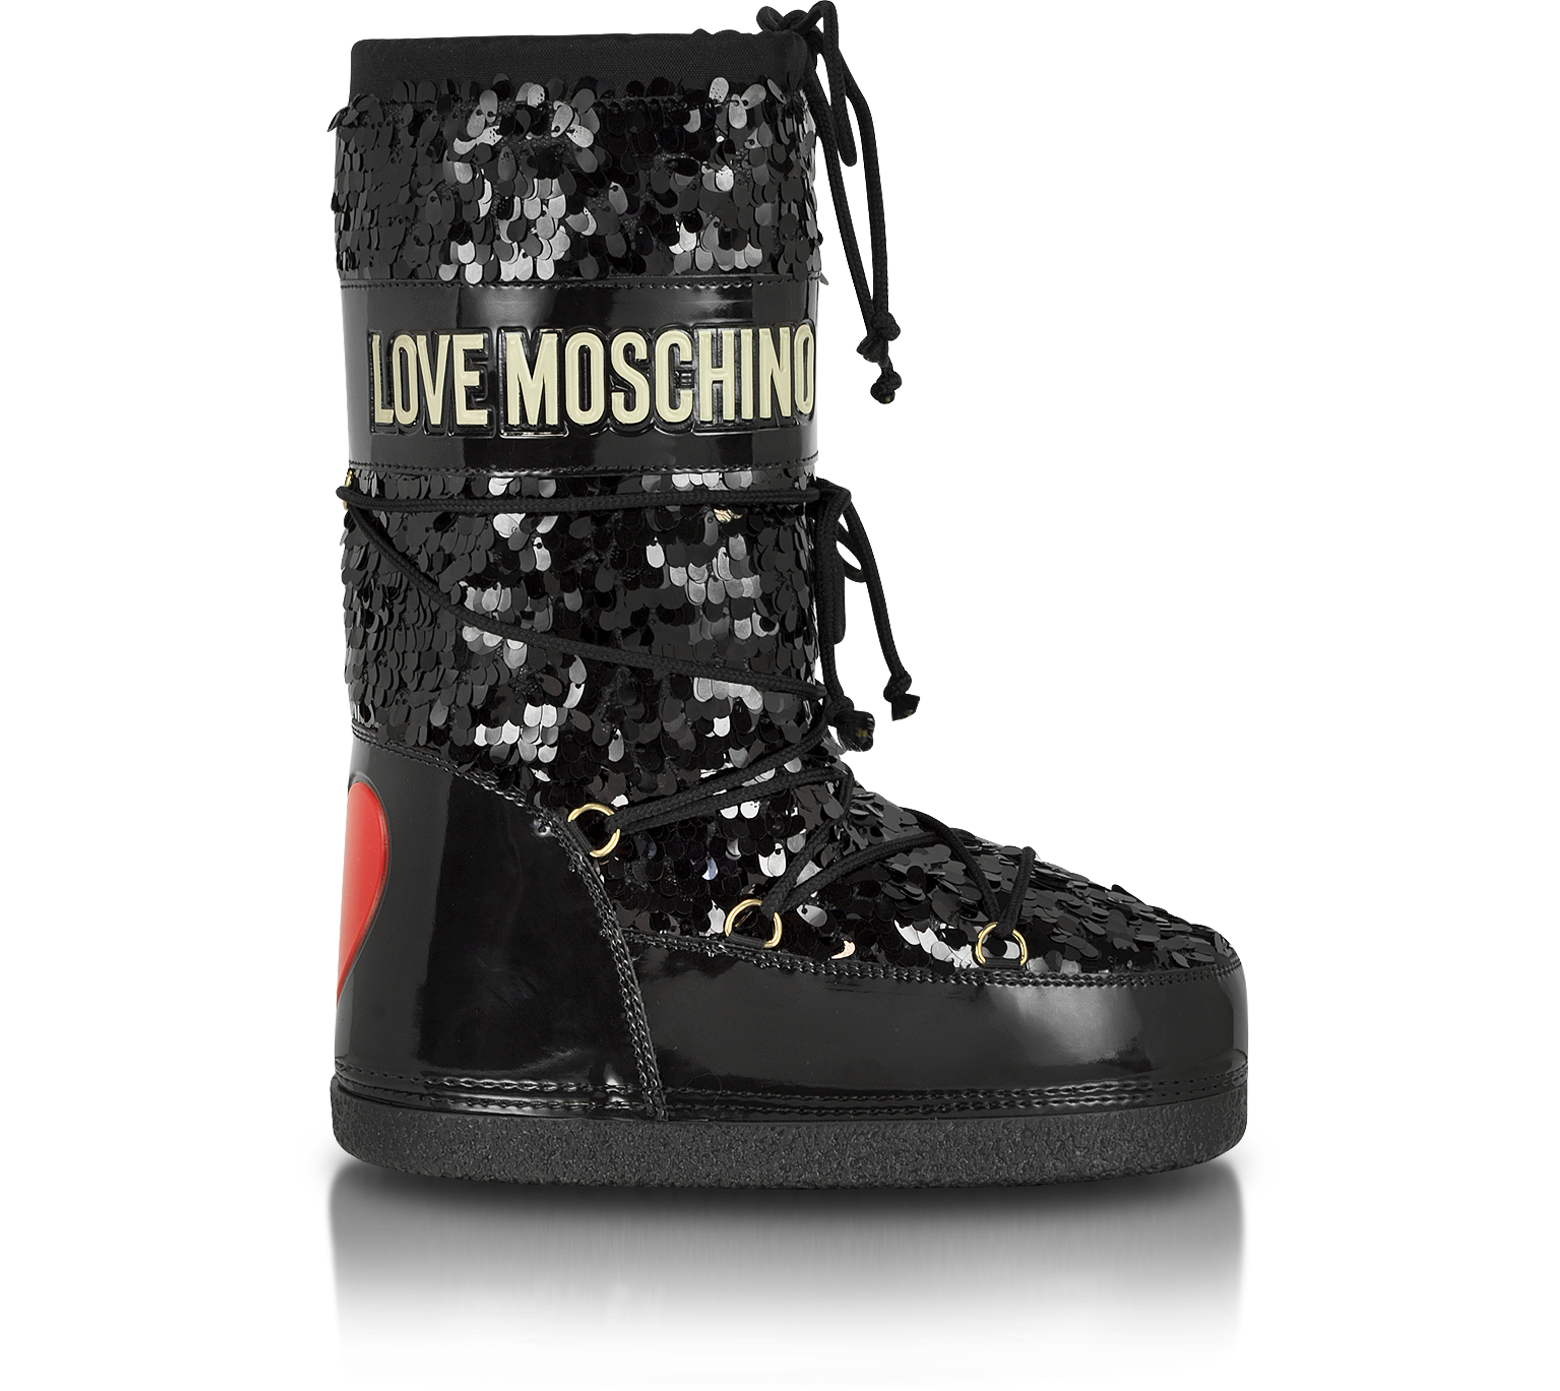 Love Moschino - Black Sequins Boots 